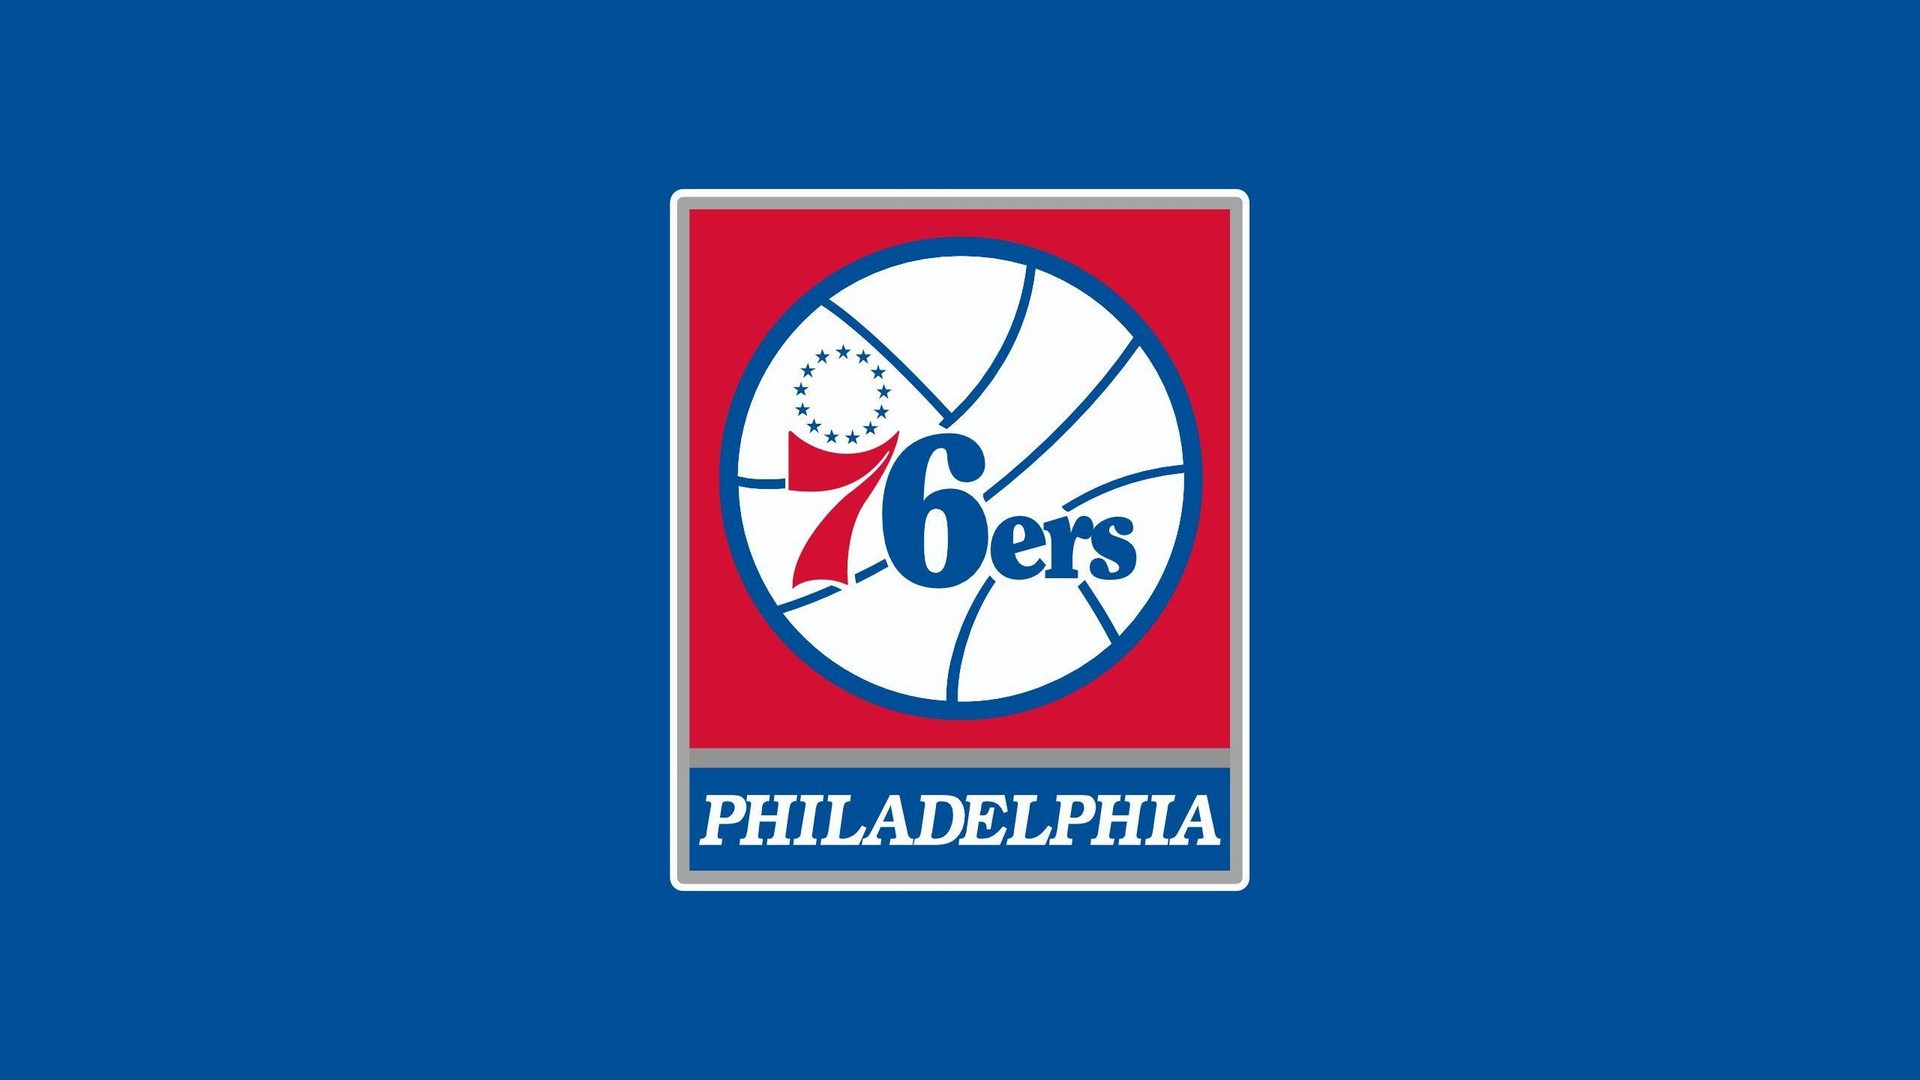 Windows Wallpaper Philadelphia 76ers with high-resolution 1920x1080 pixel. You can use this wallpaper for your Desktop Computer Backgrounds, Windows or Mac Screensavers, iPhone Lock screen, Tablet or Android and another Mobile Phone device